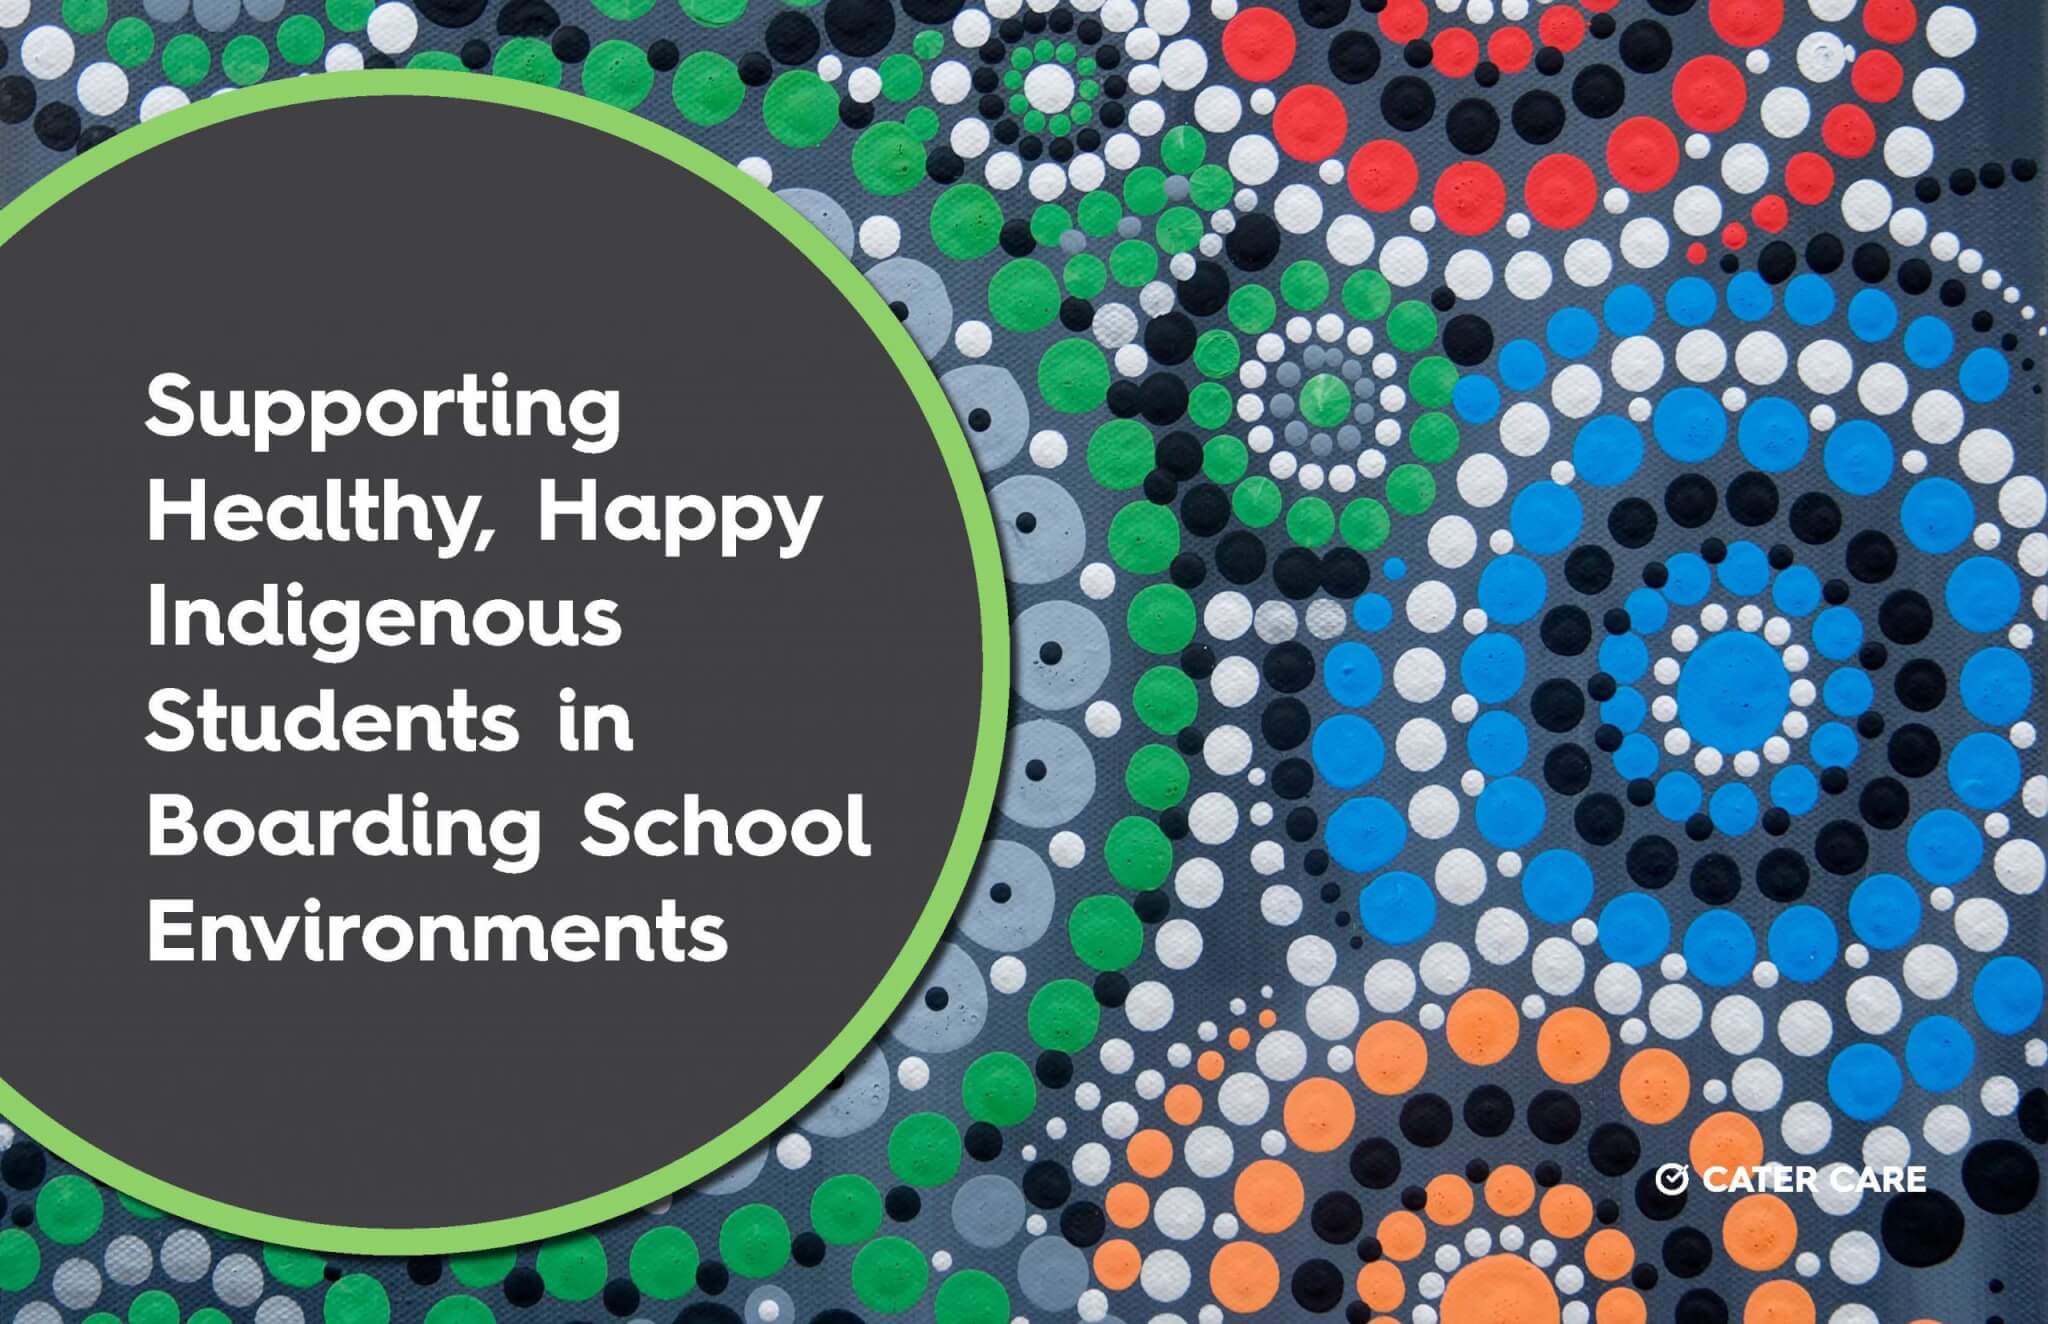 Supporting Happy, Healthy Indigenous Students in Boarding School Environments